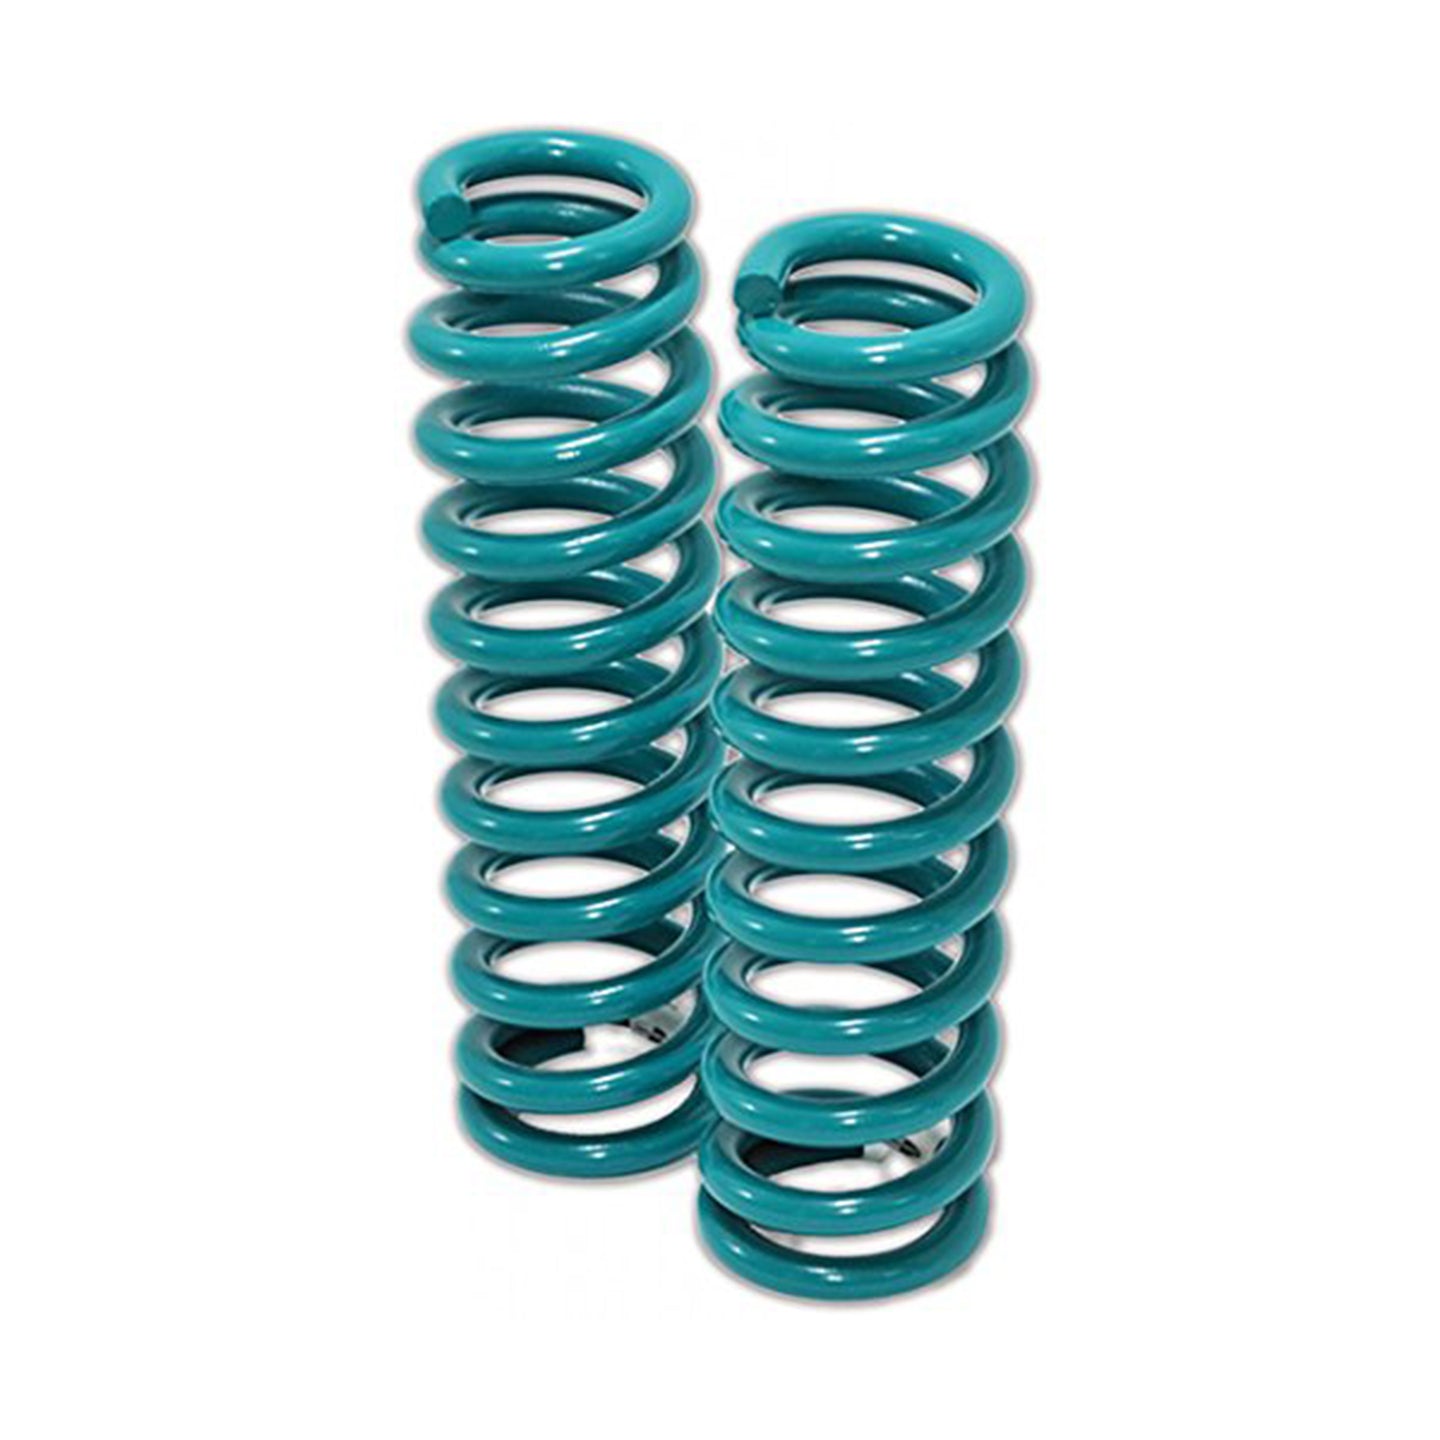 Dobinsons Front Lifted Coil Springs - Toyota 4Runner 2003+ (4th/5th Gen), FJ Cruiser 2006+, & Tacoma 4x4 2005-Present